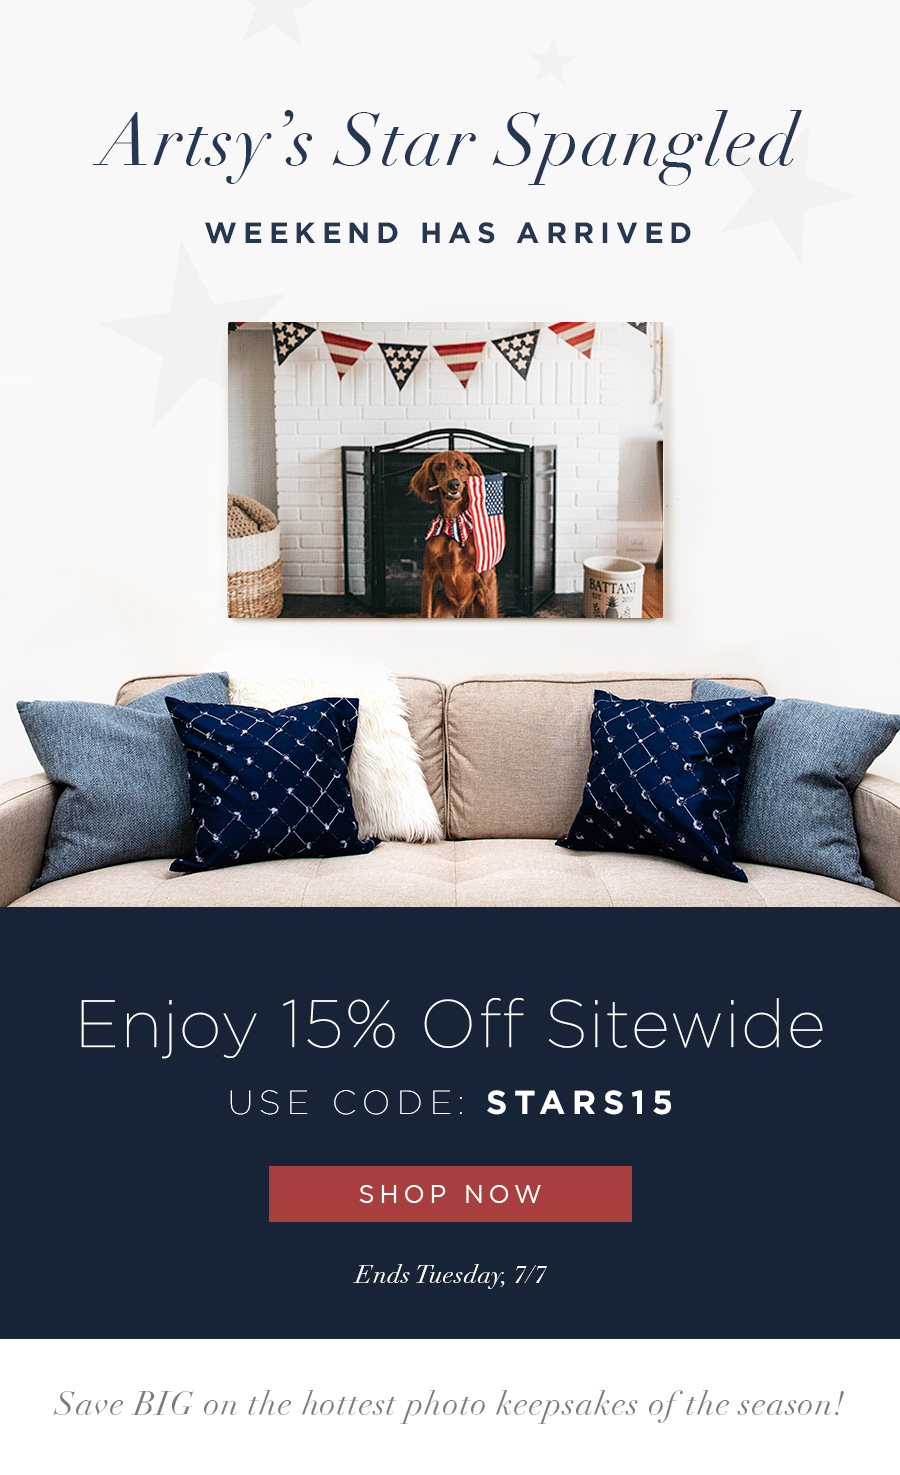 Artsy's Star Spangled weekend has arrived  Enjoy 15% Off Sitewide USE CODE: STARS15  Ends Tuesday, 7/7